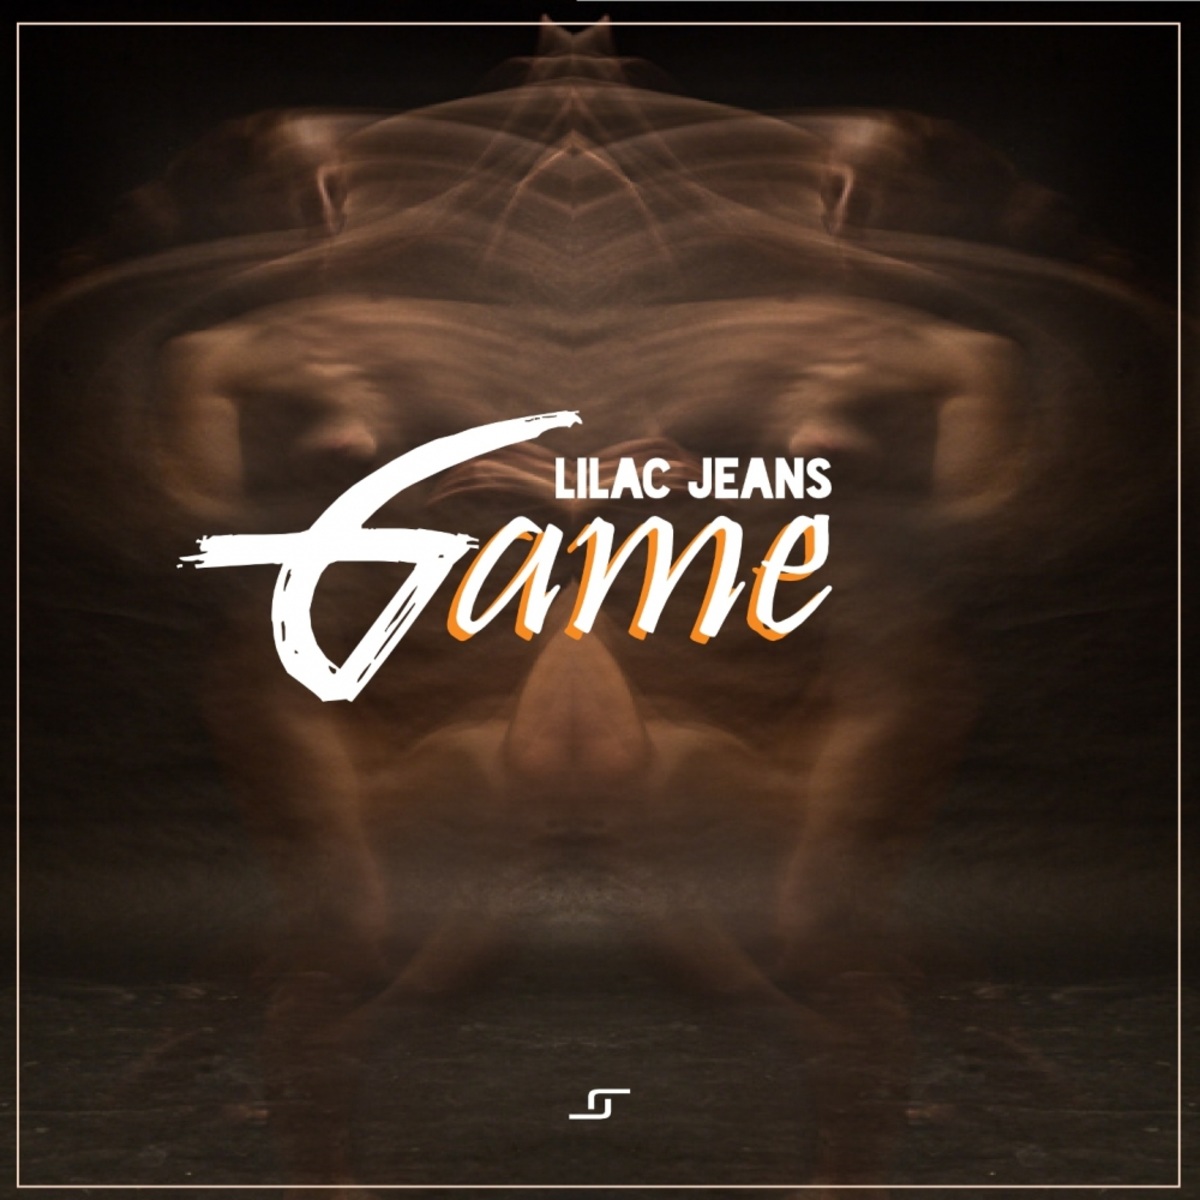 Lilac Jeans - Game / Lilac Jeans Records